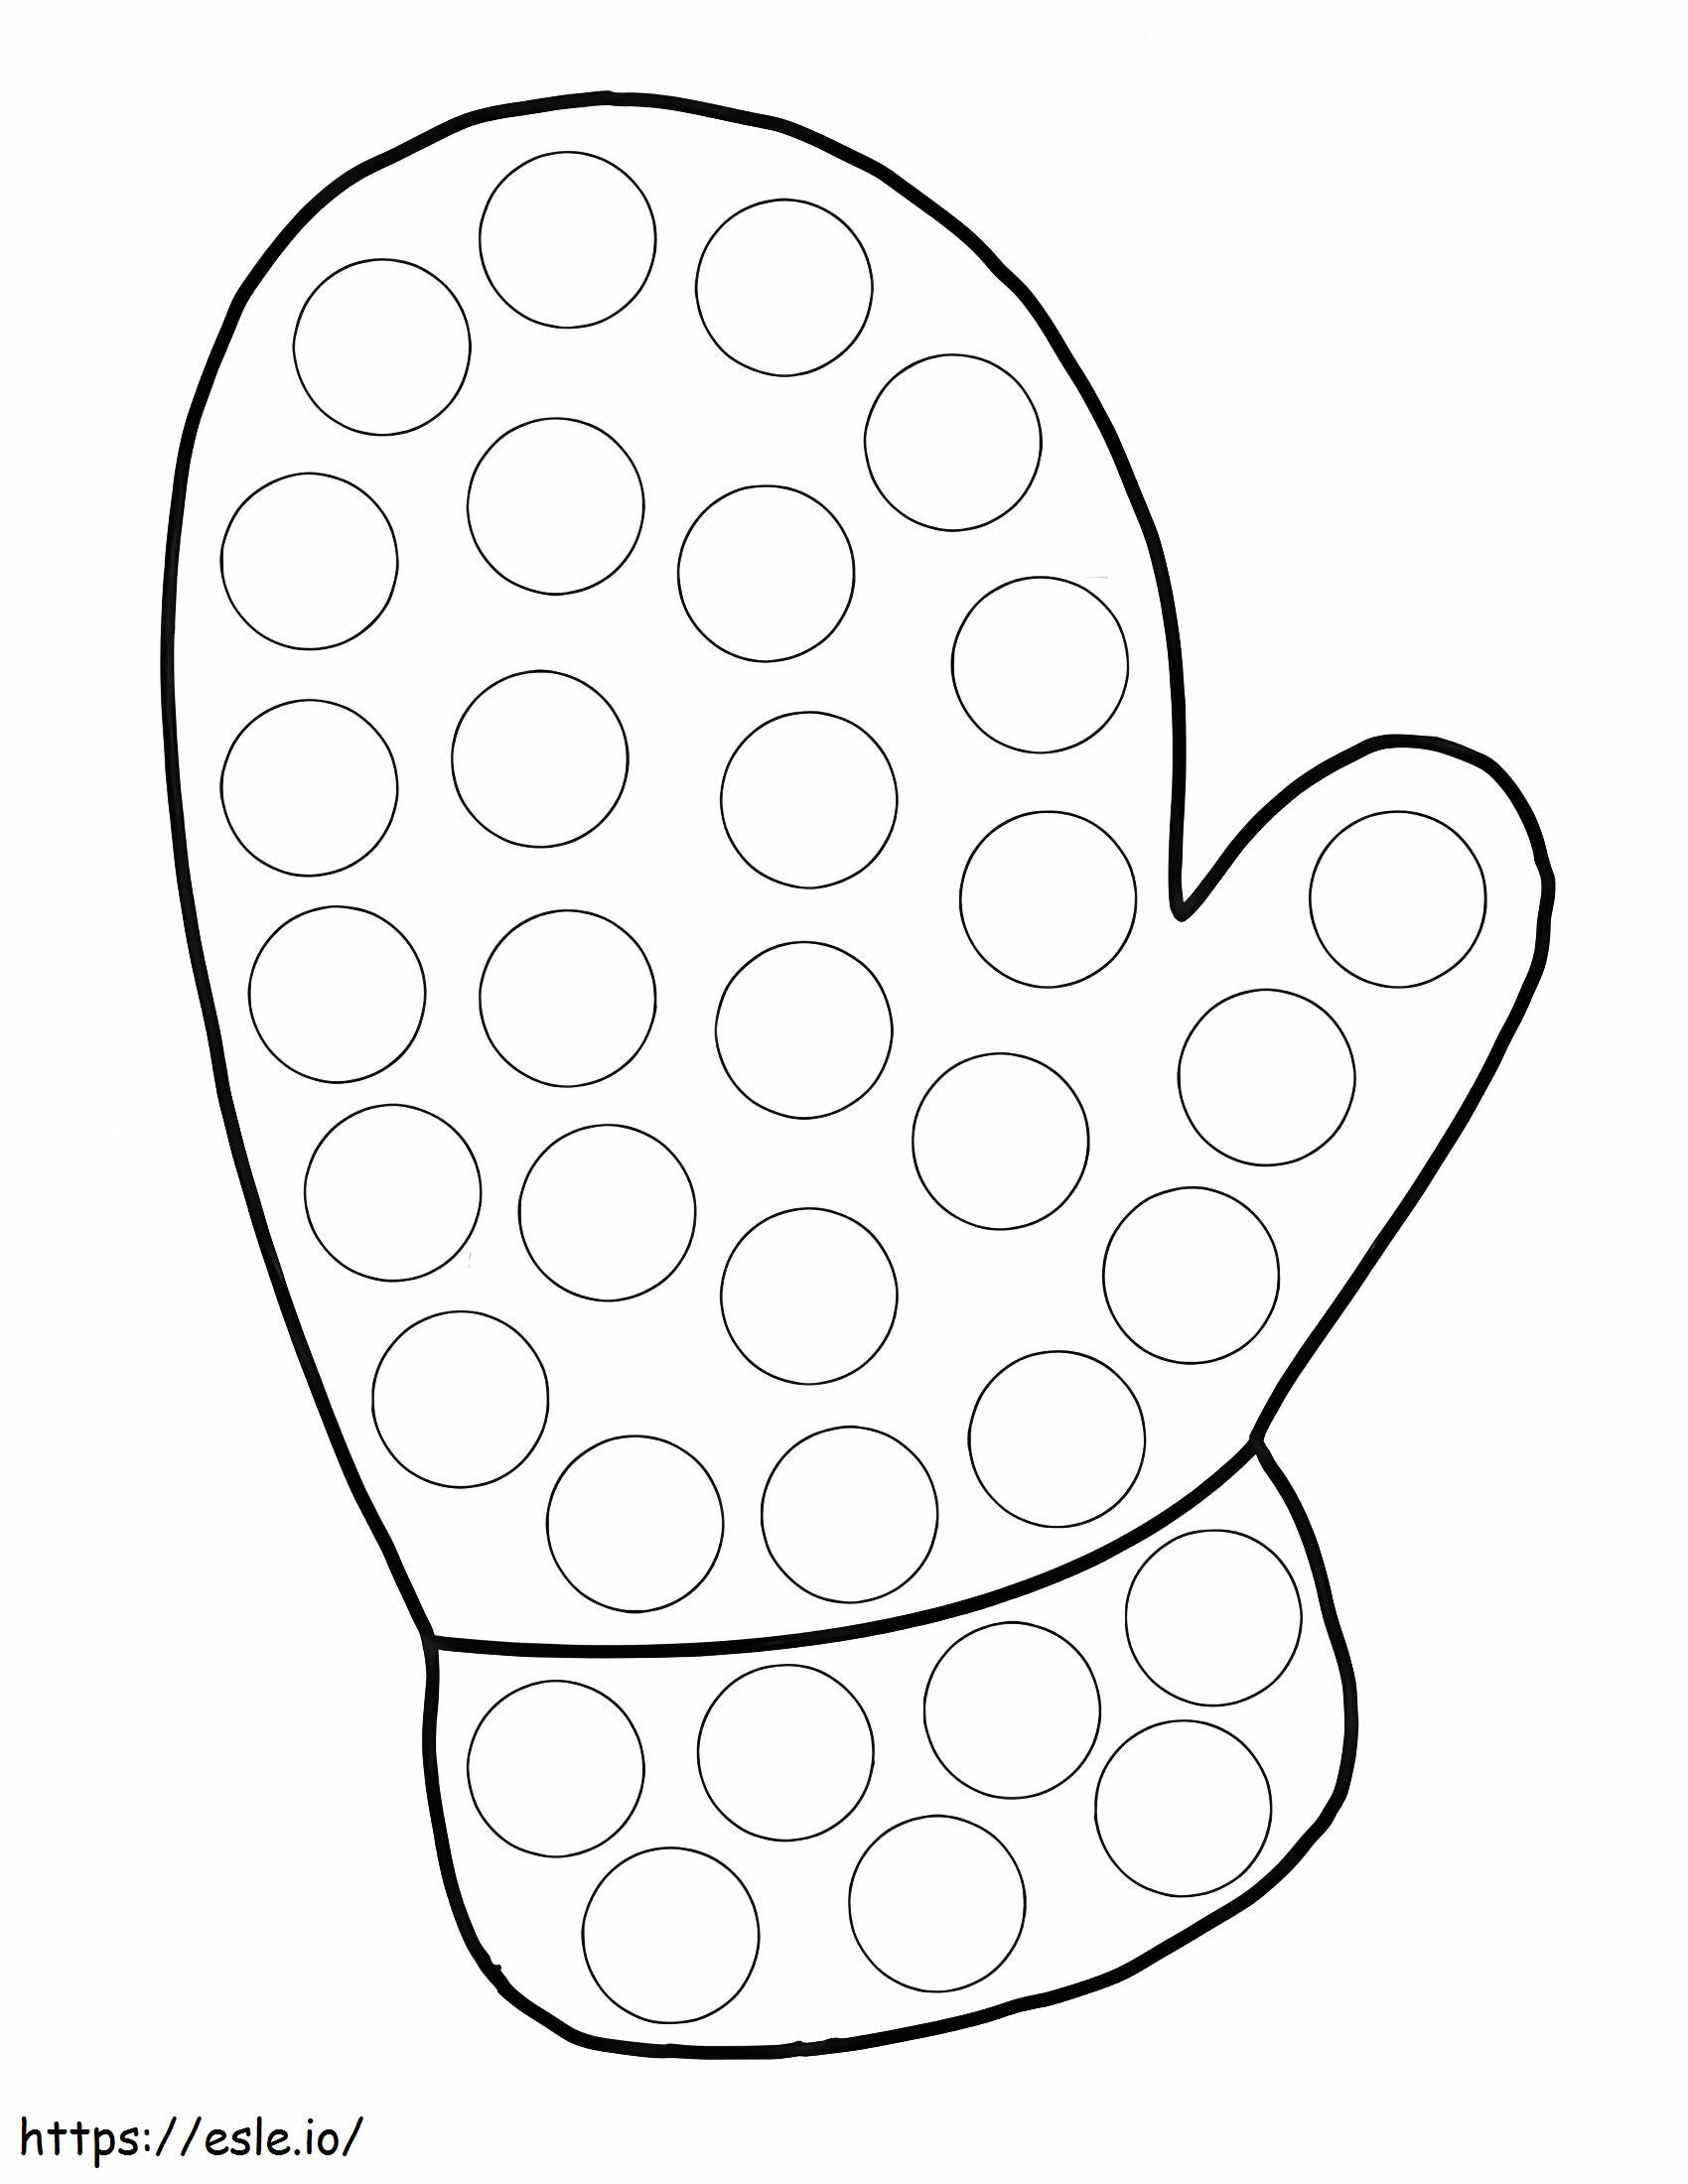 Center Dot Markers coloring page